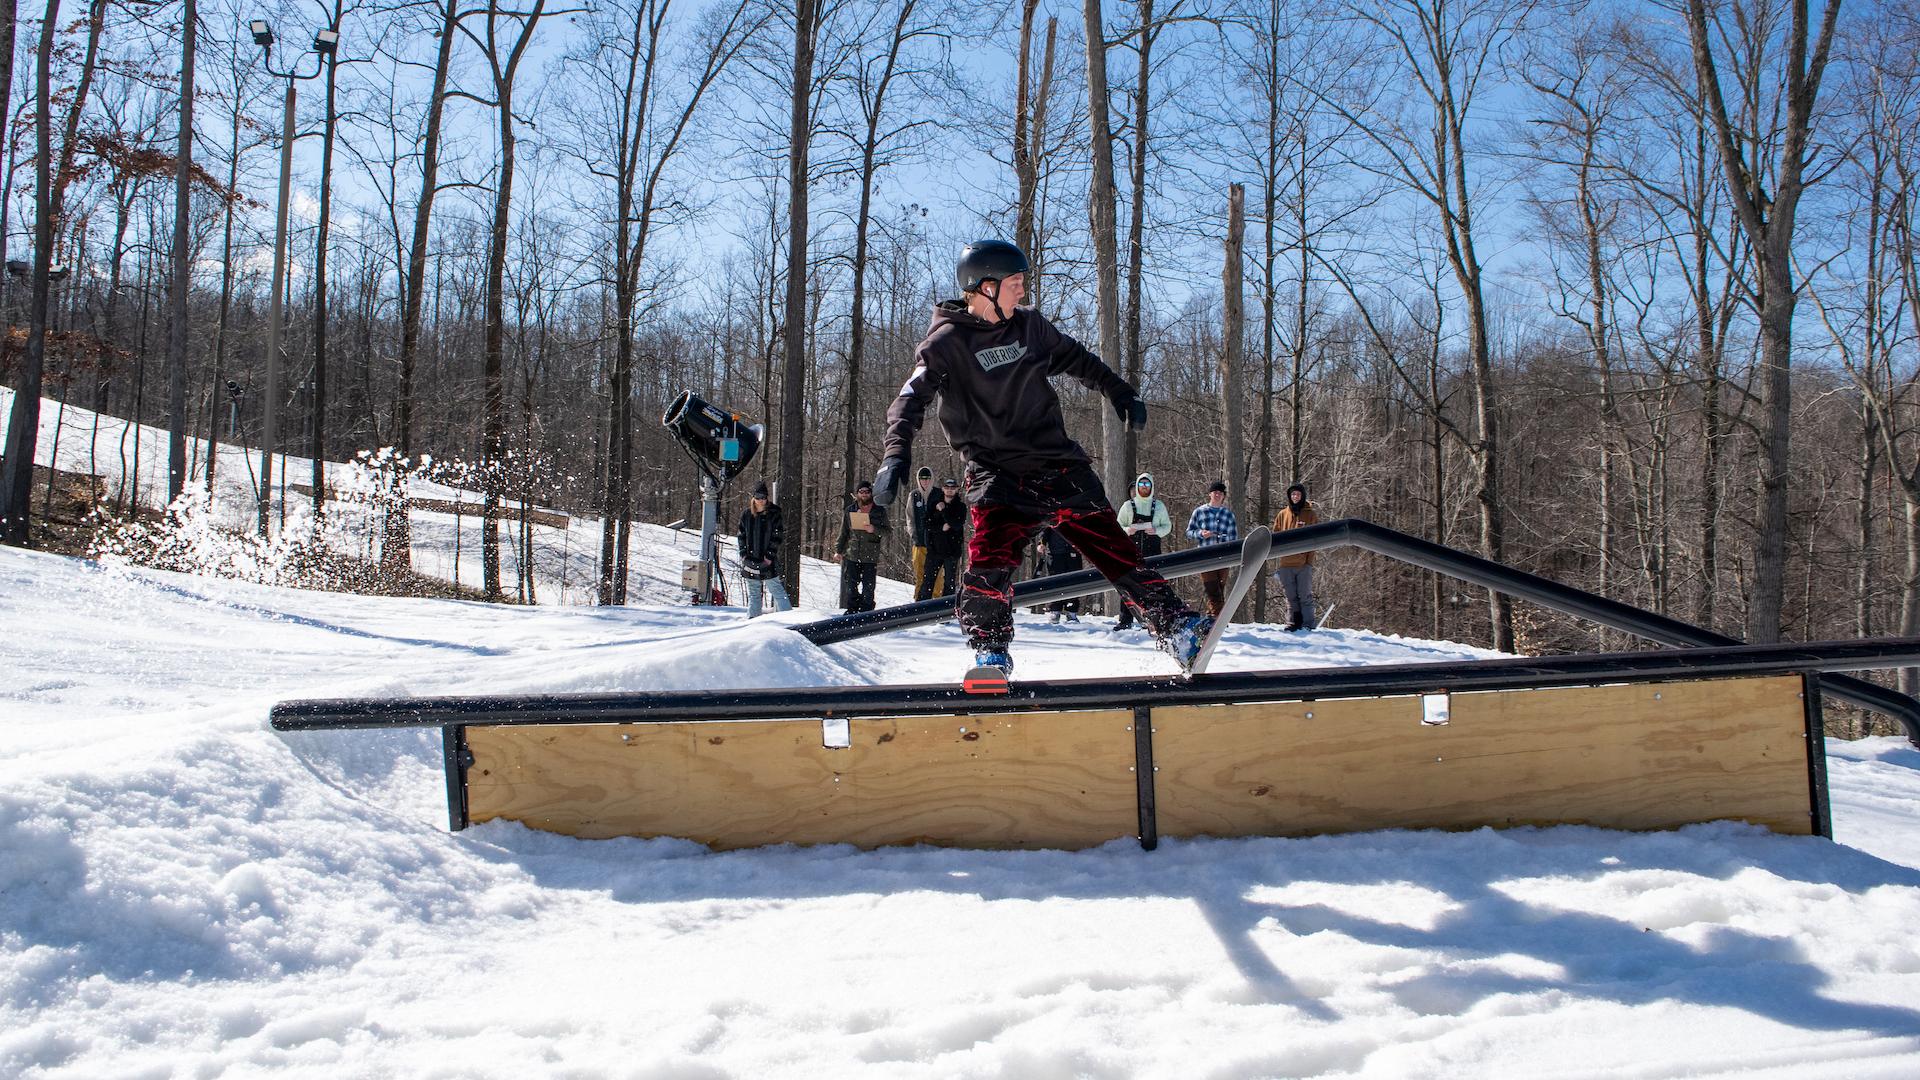 Slopestyle at Snow Trails